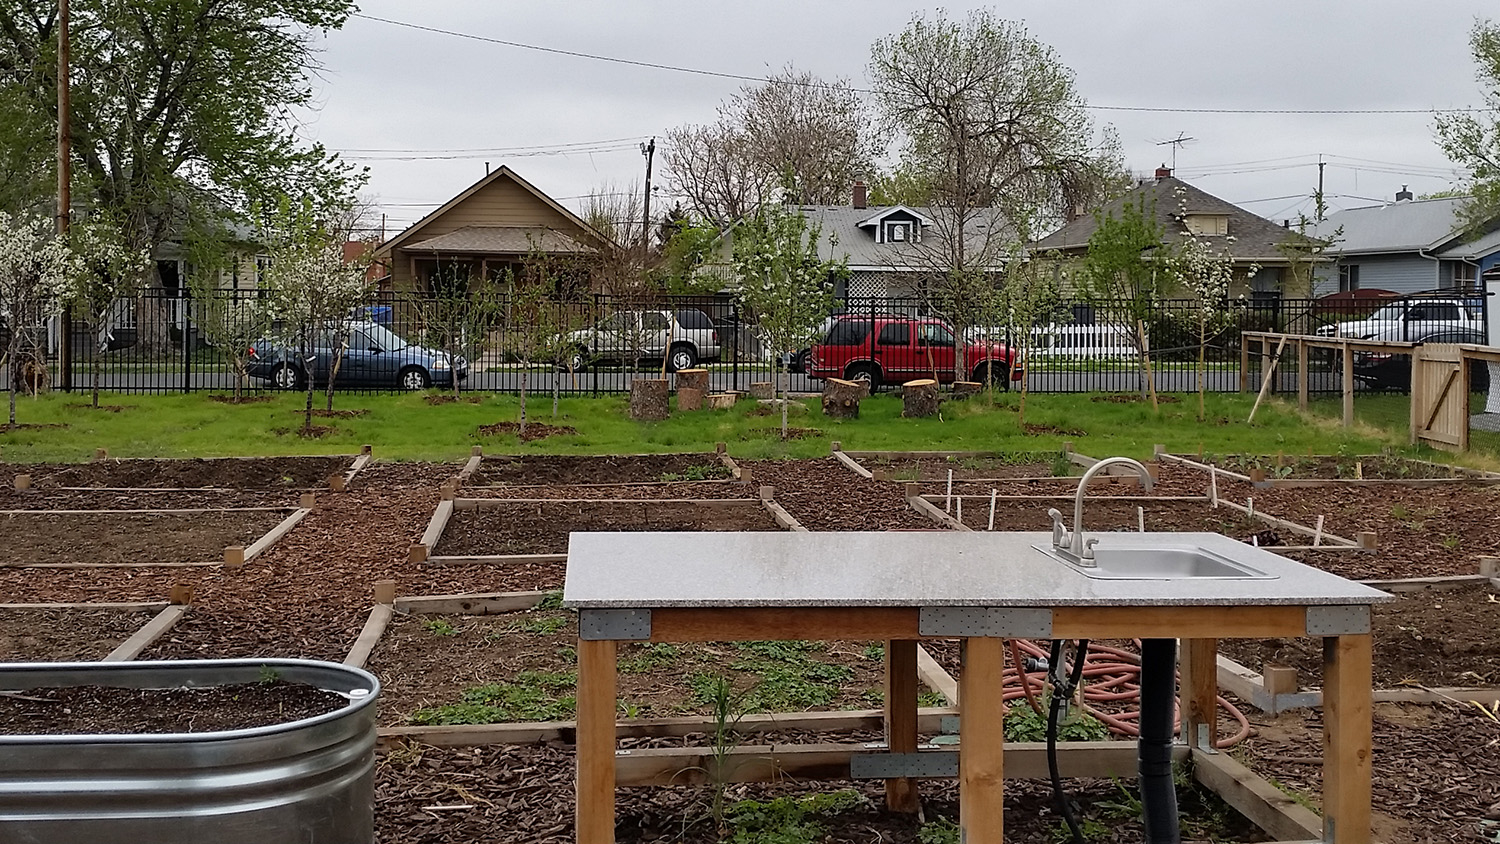 work table and garden plots in a large fenced-in area